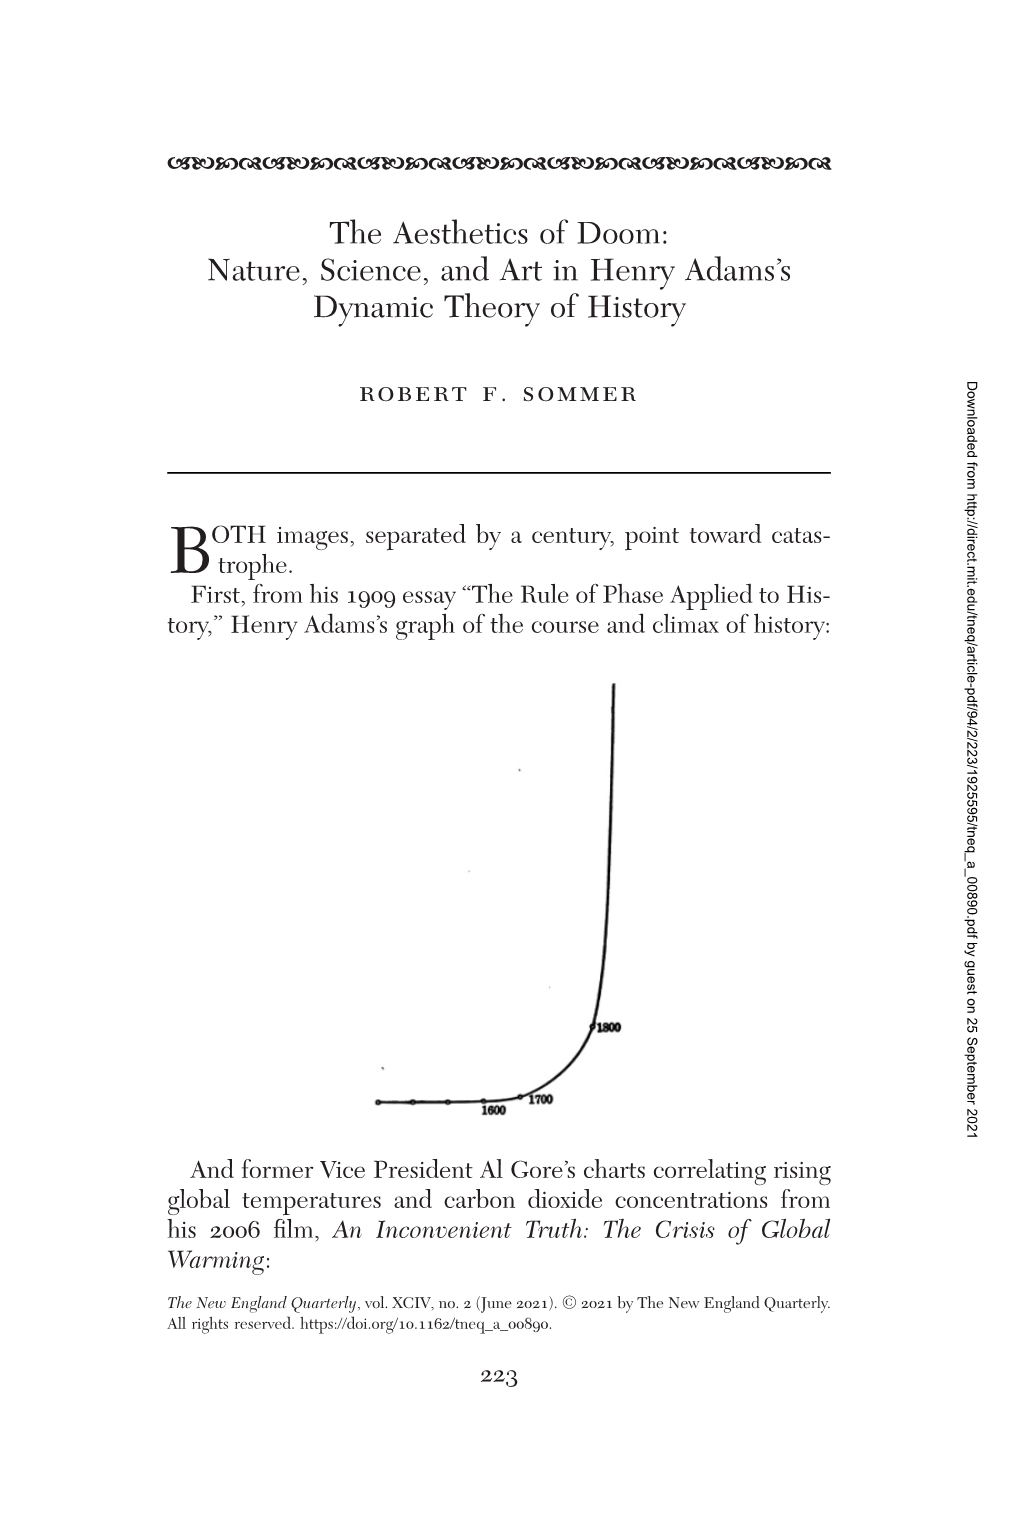 Nature, Science, and Art in Henry Adams's Dynamic Theory of History